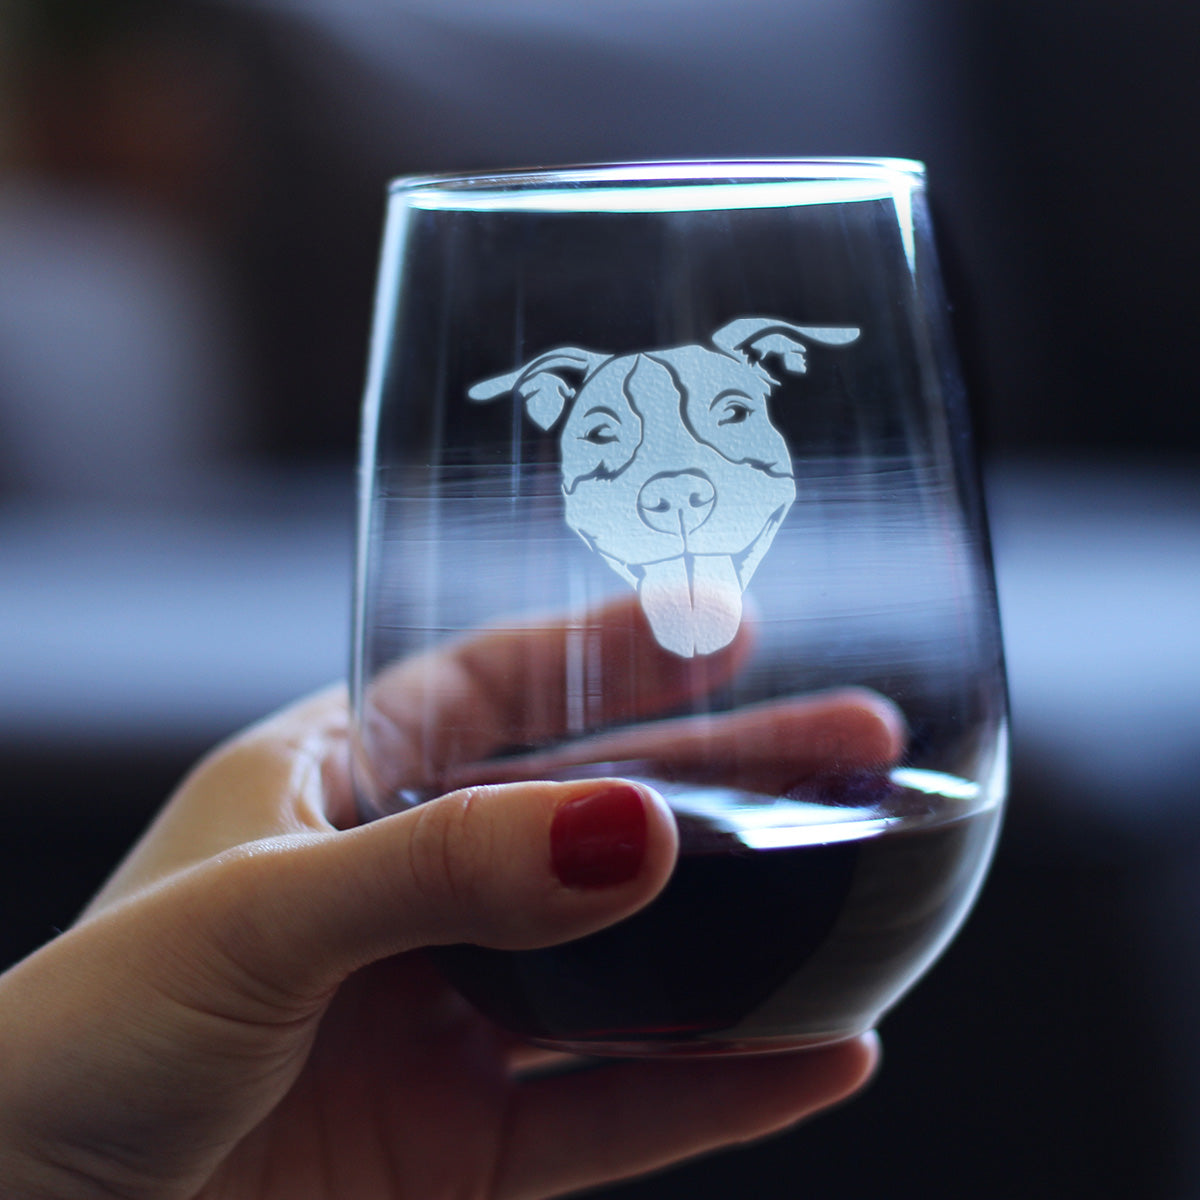 Happy Pitbull - Stemless Wine Glass - Cute Pitbull Themed Dog Gifts and Party Decor for Women and Men - Large Glasses